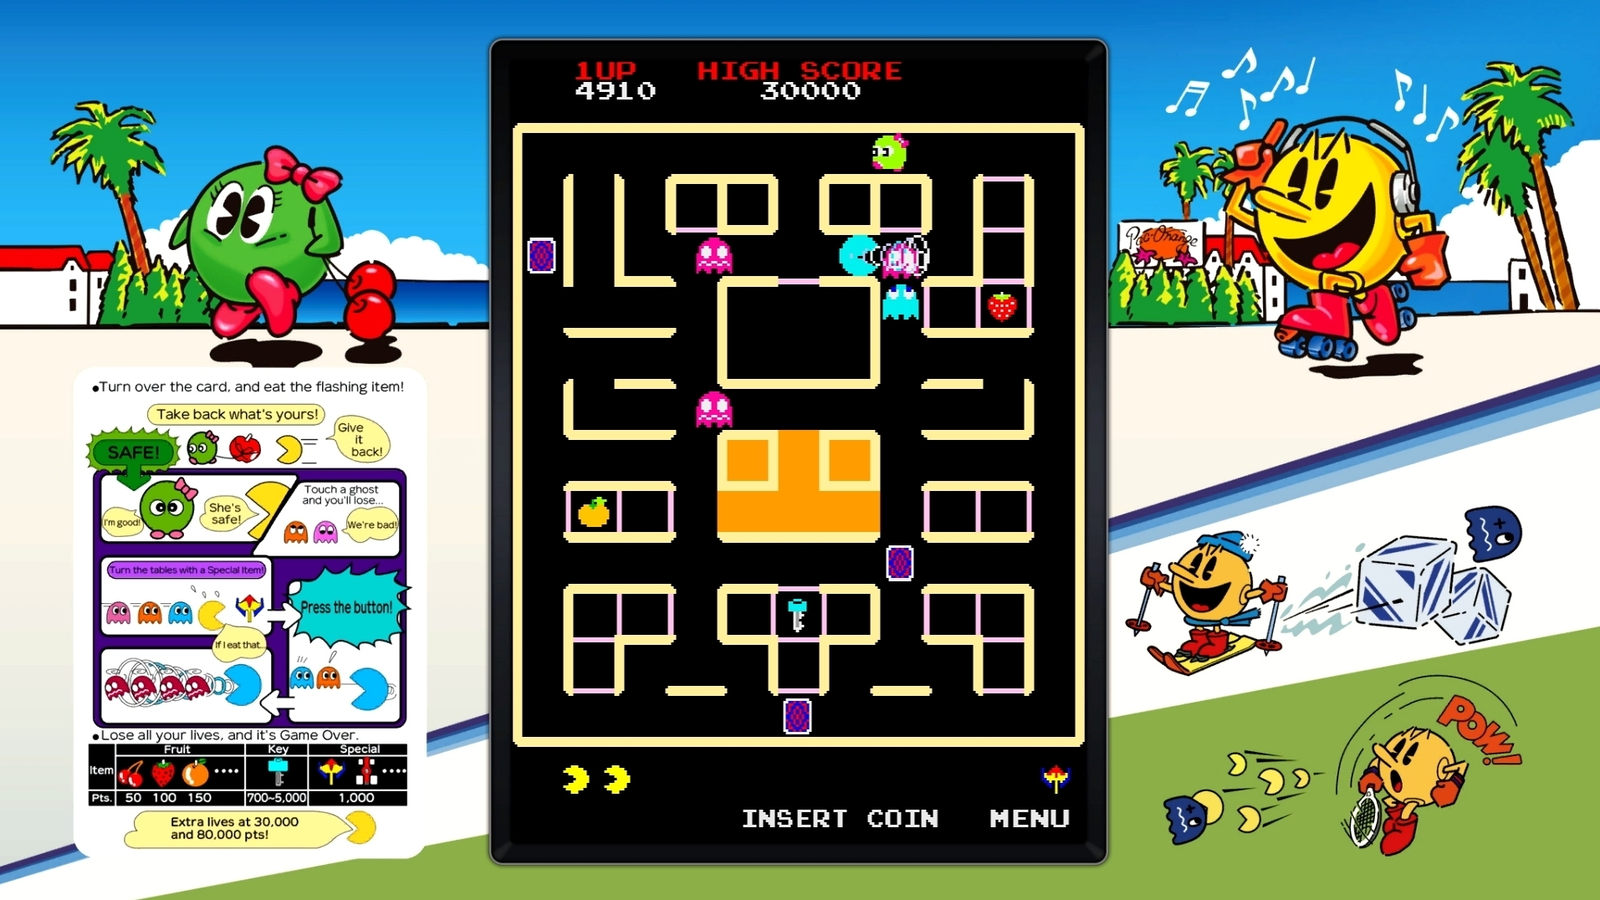 NEWS │ The Official Site for PAC-MAN - Video Games & More